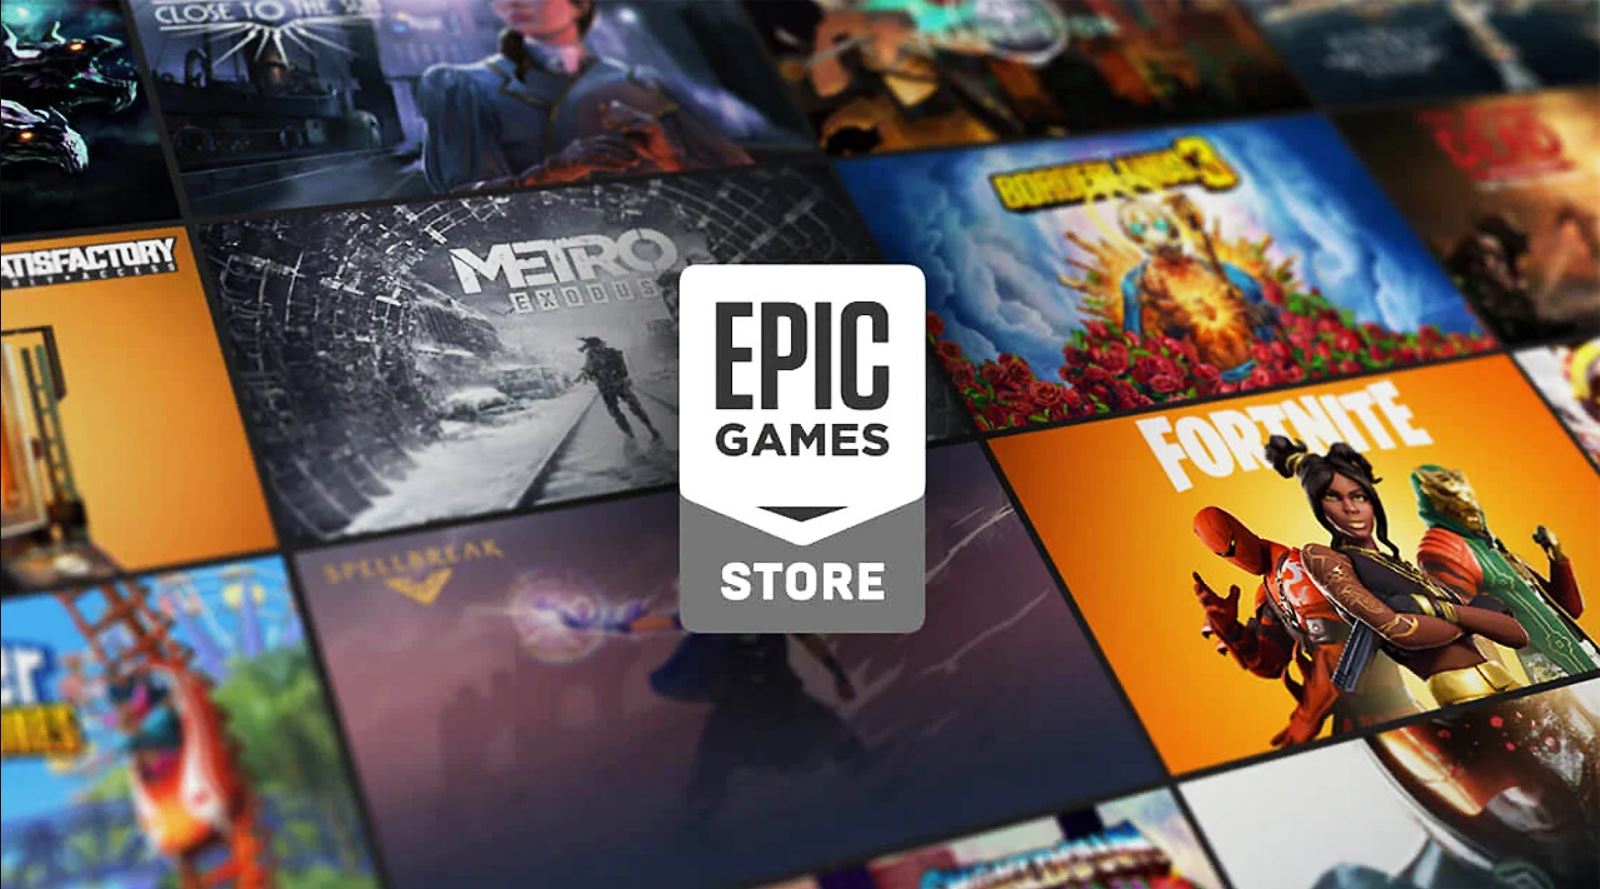 Hurry! Epic Games Are Giving Free Games Everyday – Claim Your Daily Reward